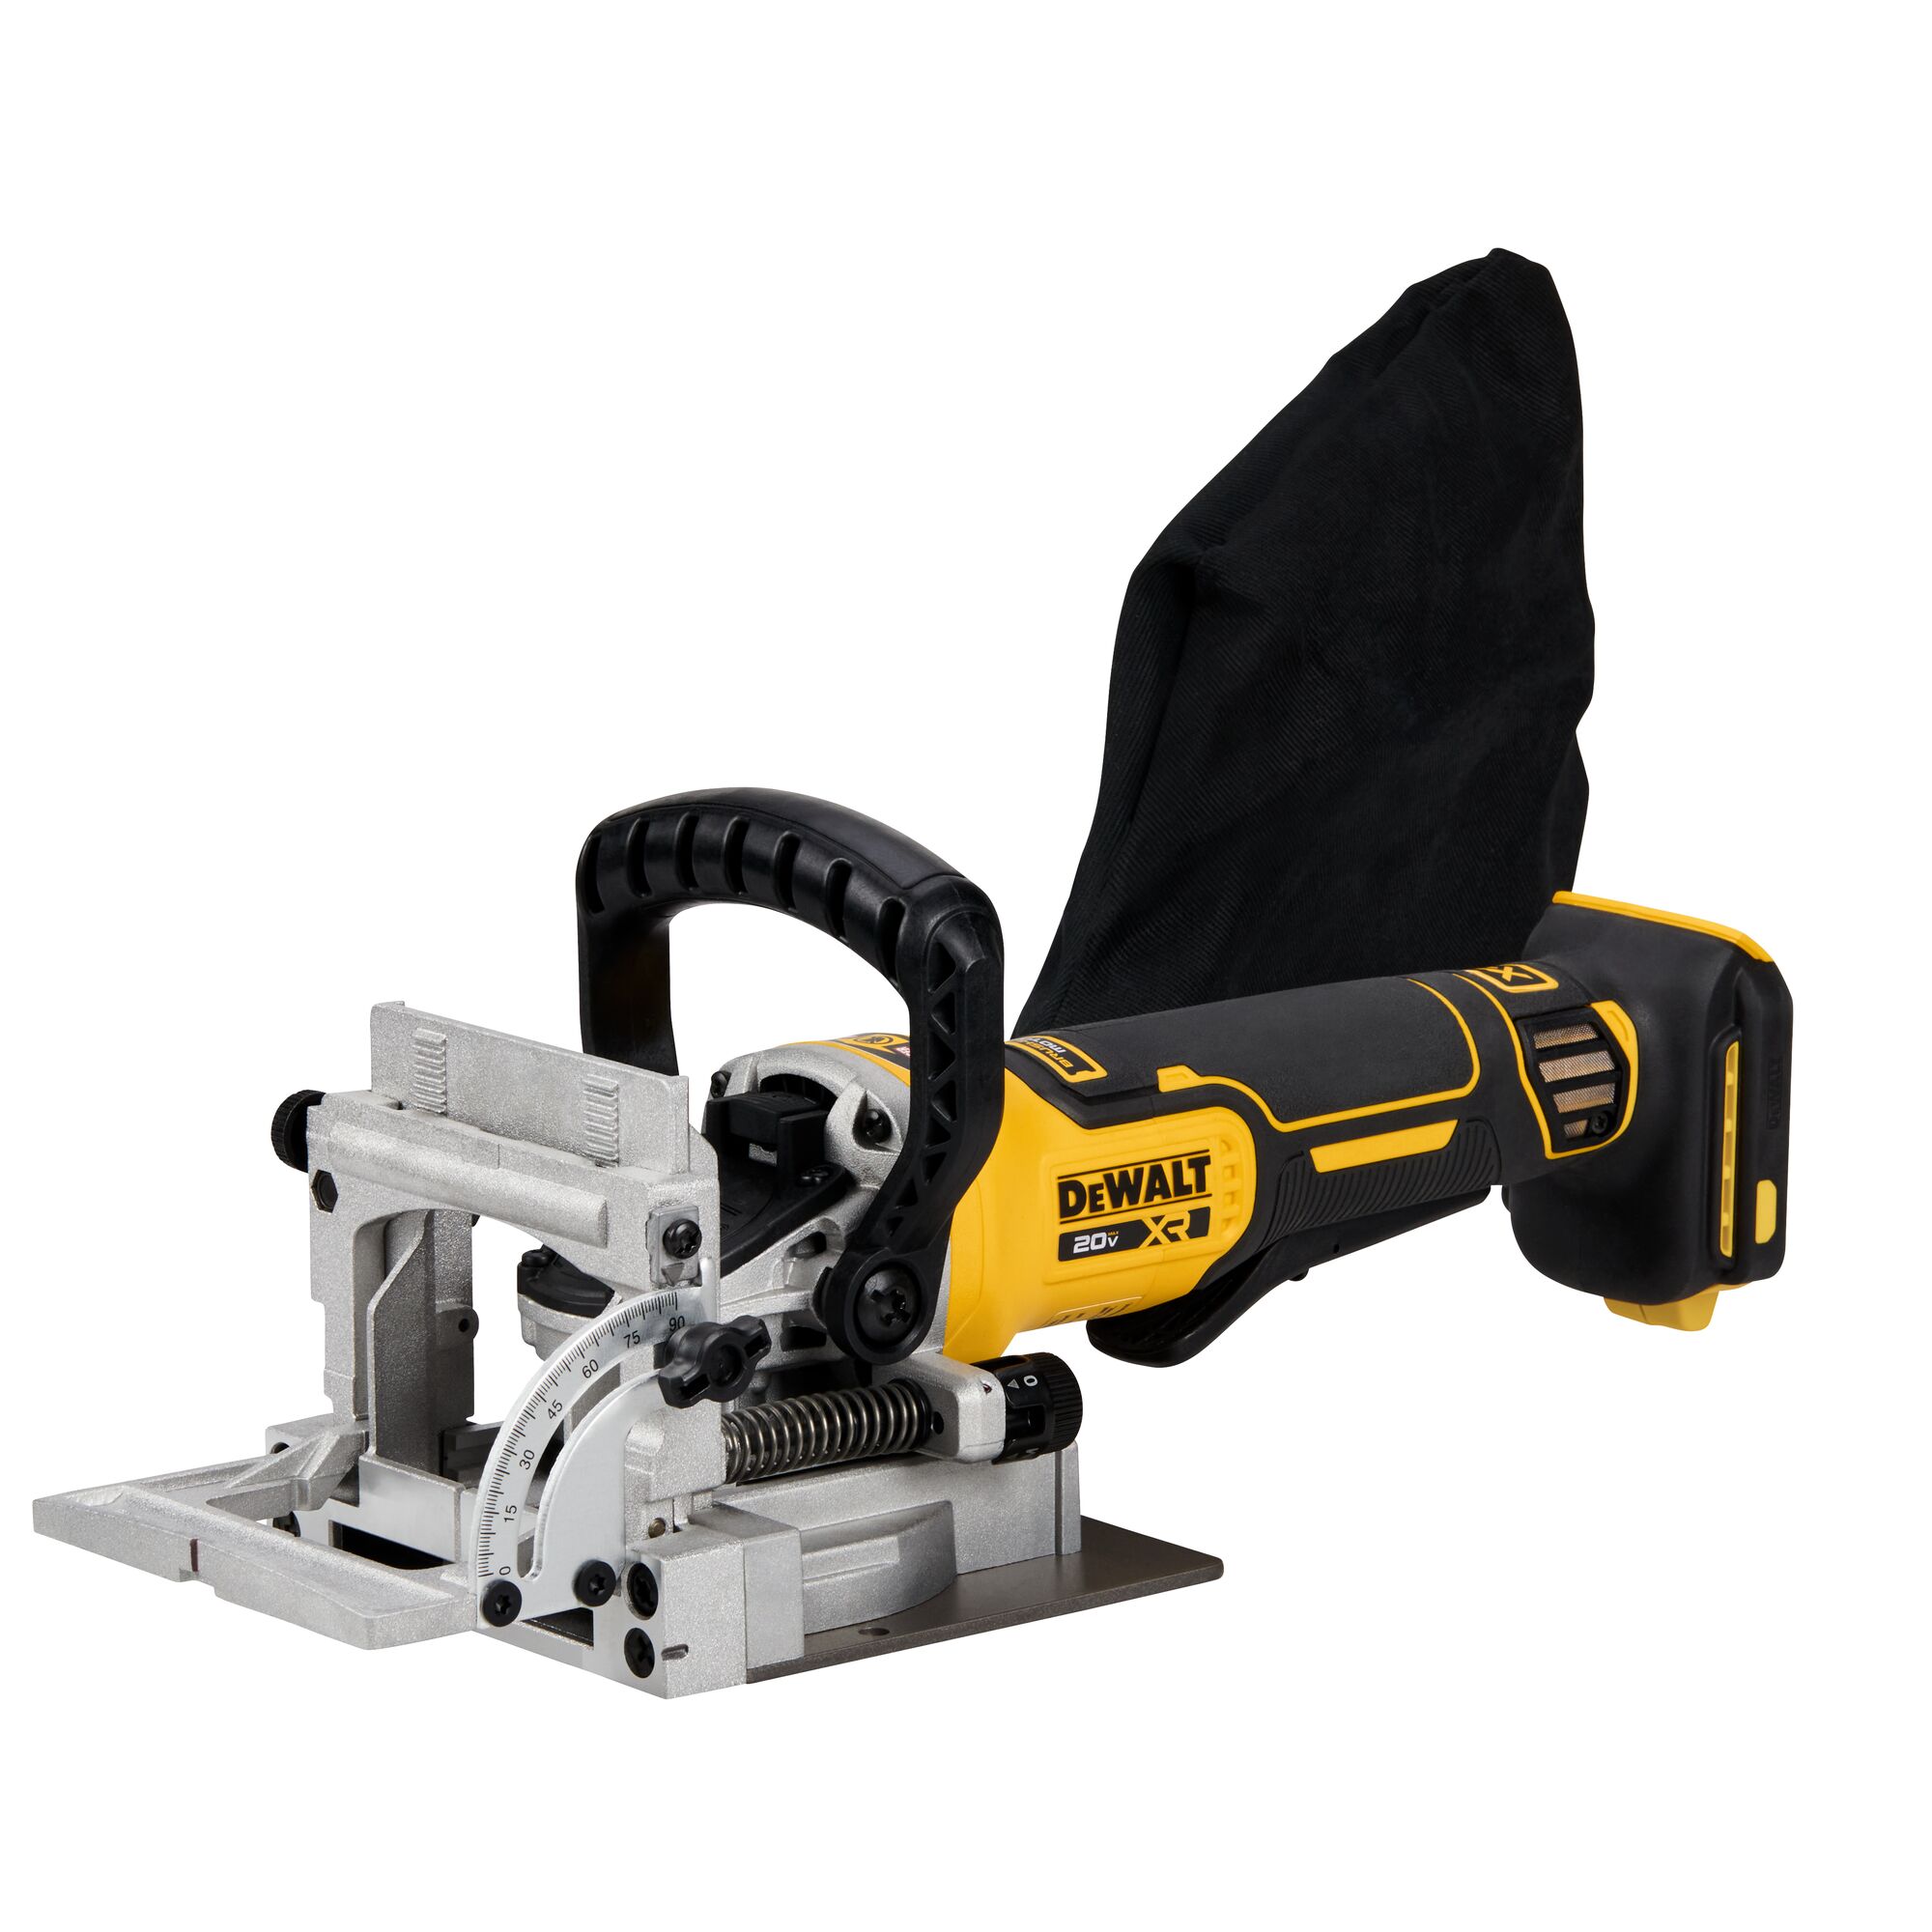 Dewalt Joiner Biscuits: The Key to Perfect Woodworking Joints